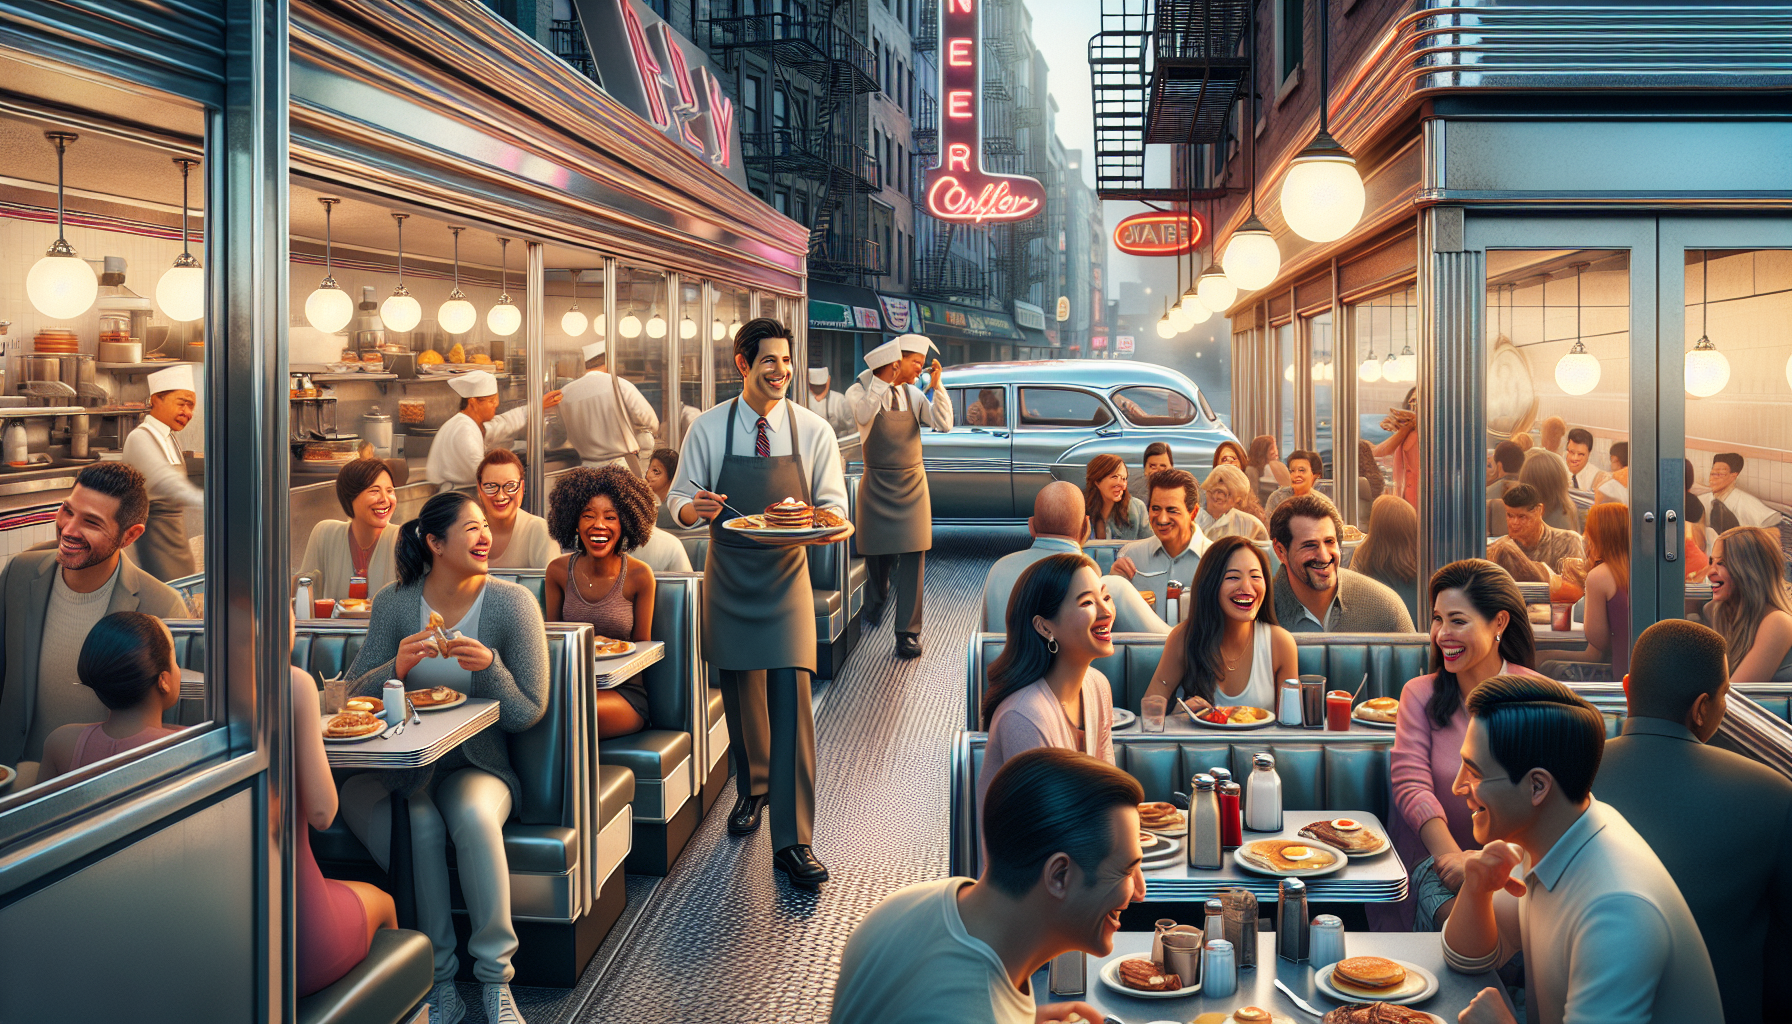 Classic American diner serving all-day breakfast